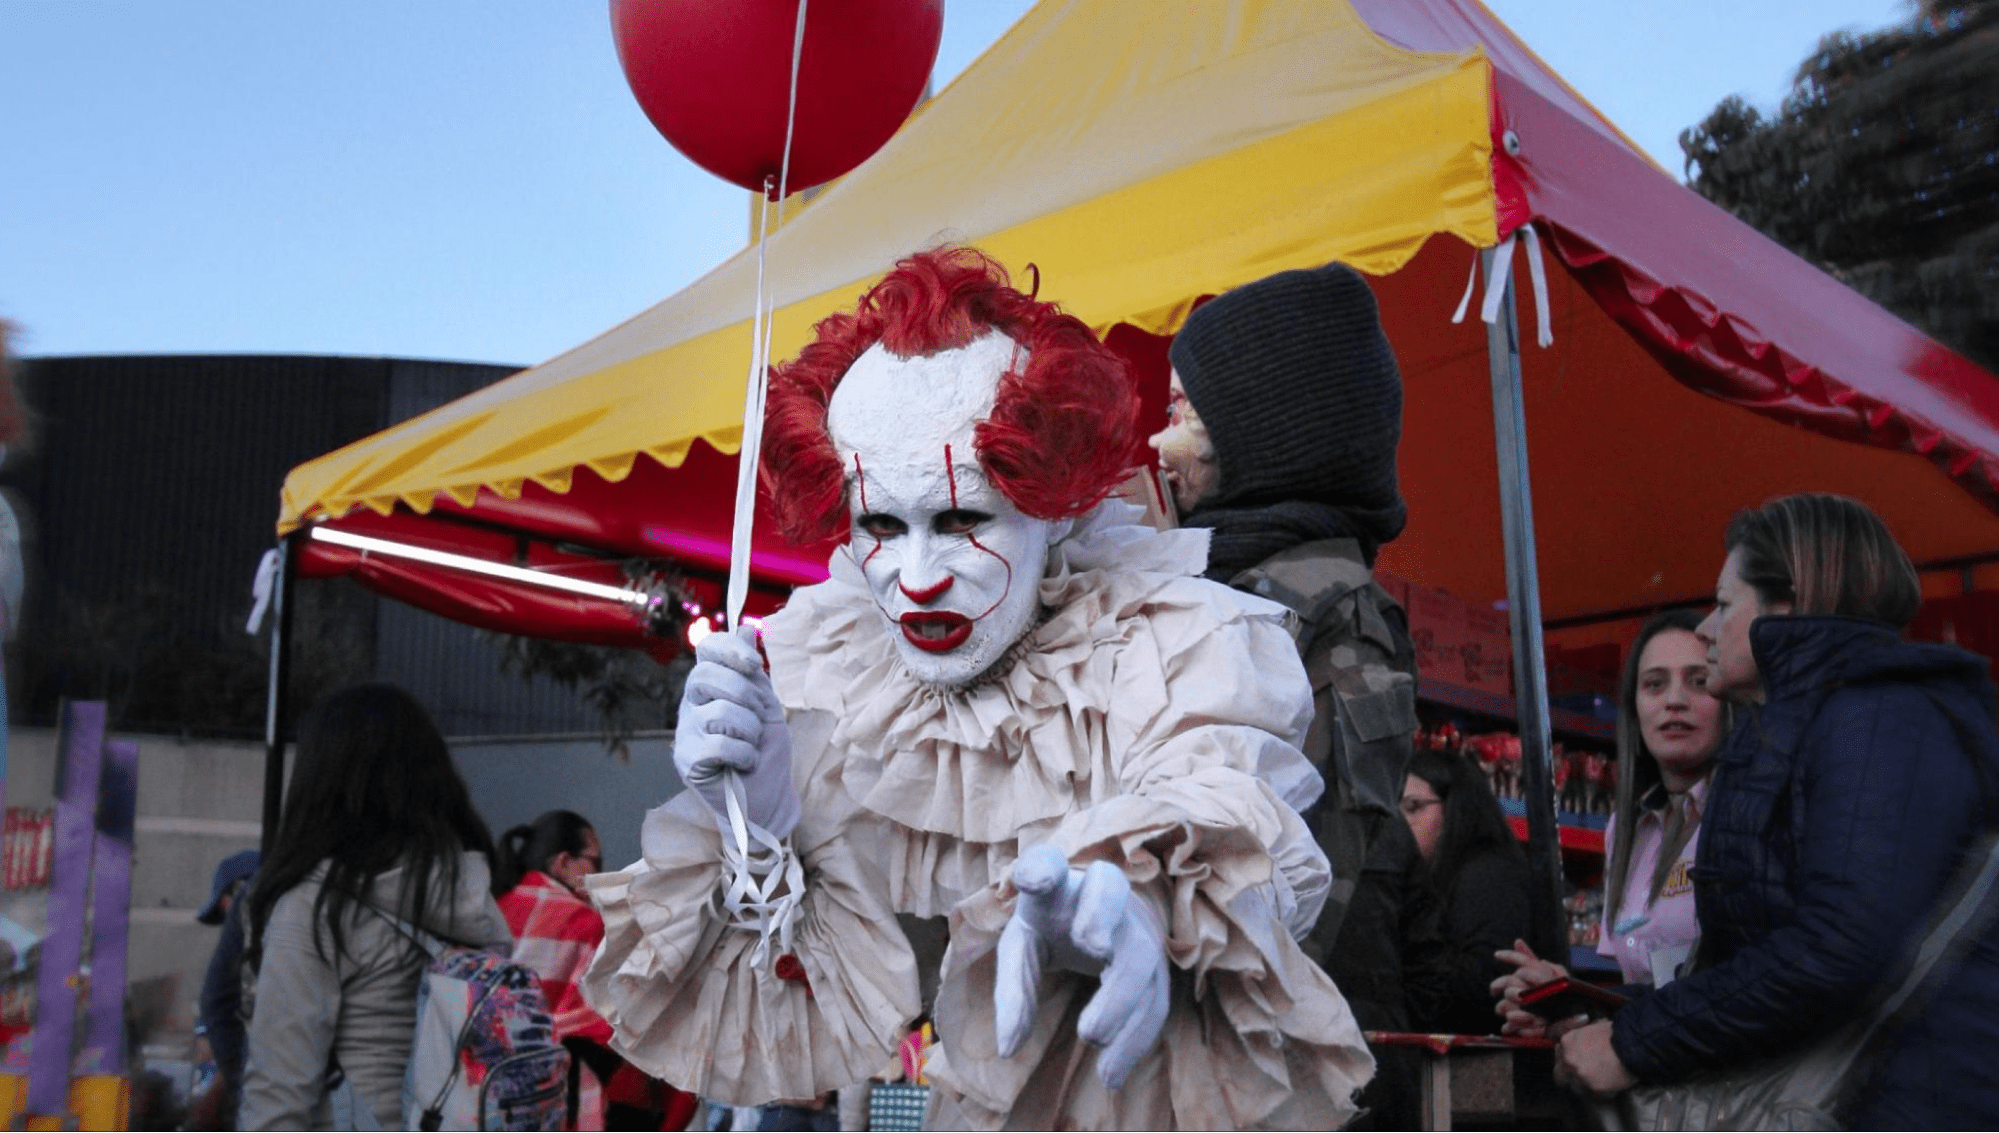 A scary clown at a festival